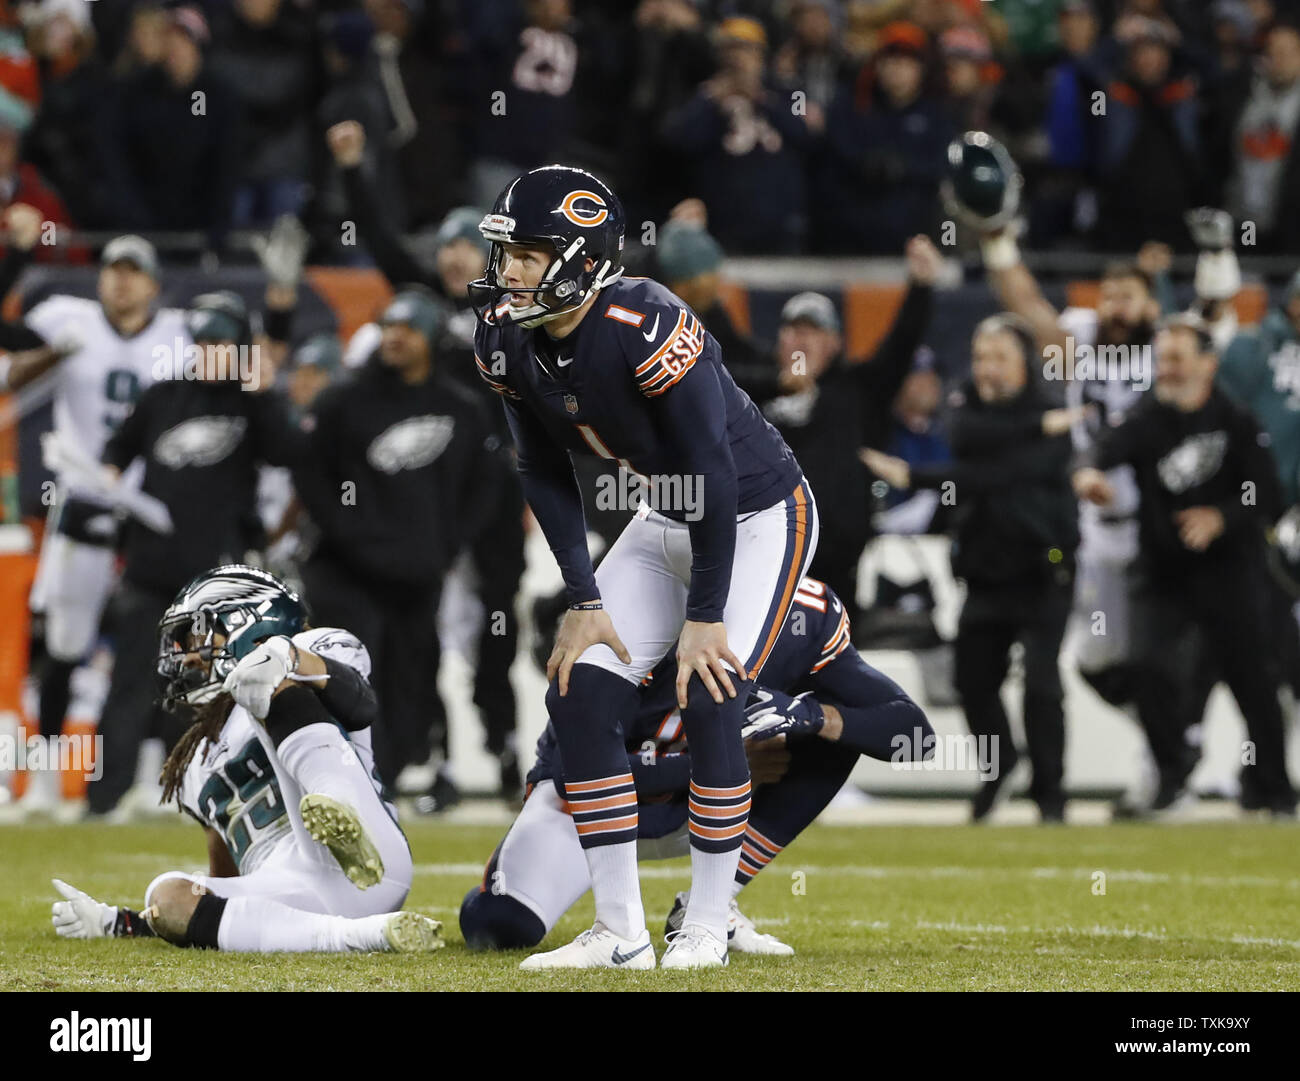 Chicago Bears kicker Cody Parkey (1) reacts after missing what could have been a game-winning field goal against the Philadelphia Eagles during the final seconds of the game allowing the Eagels to upset the Bears 16-15 in their NFC Wild Card playoff game at Soldier Field in Chicago on January 6, 2019.    Photo by Kamil Krzaczynski/UPI Stock Photo